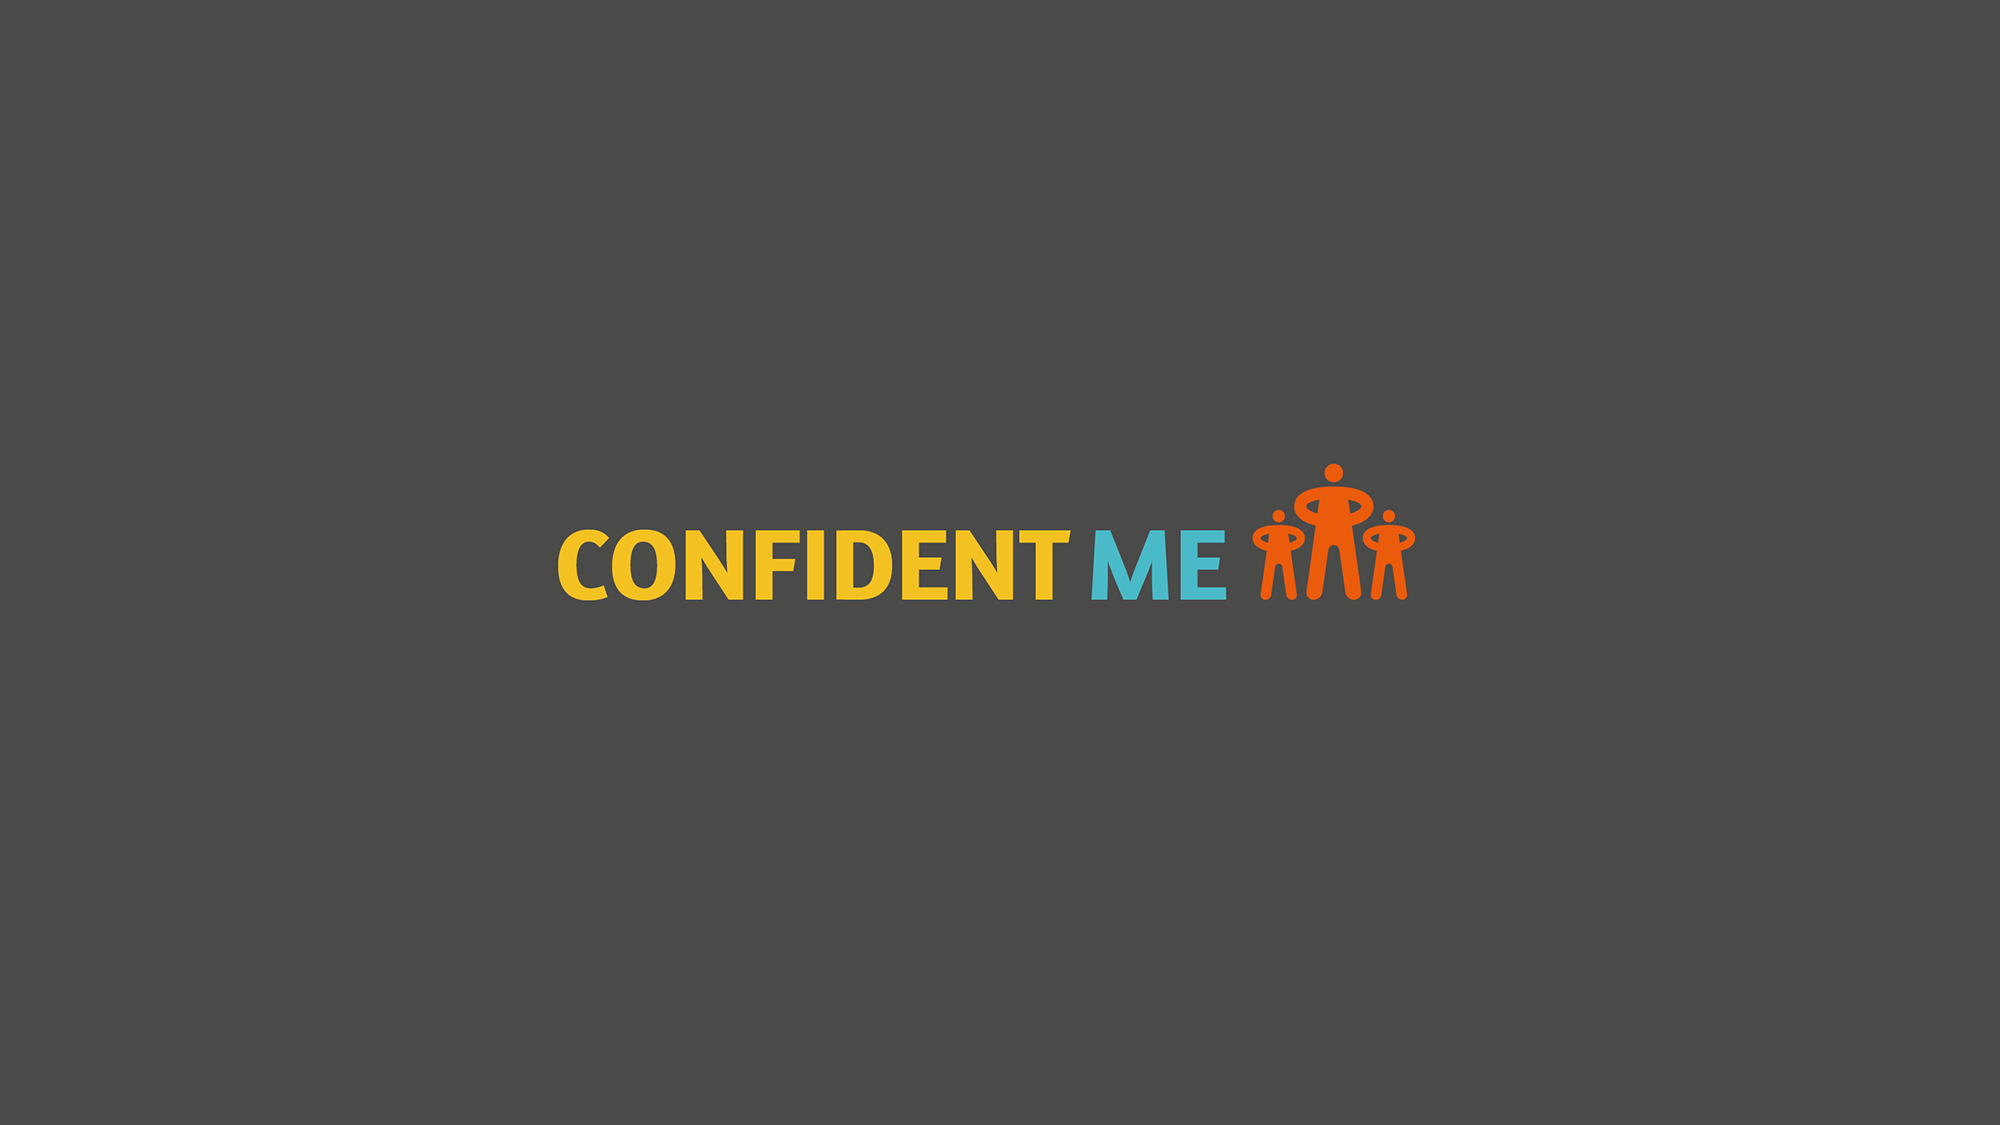 ConfidentME Week – An Introduction to PR and Marketing